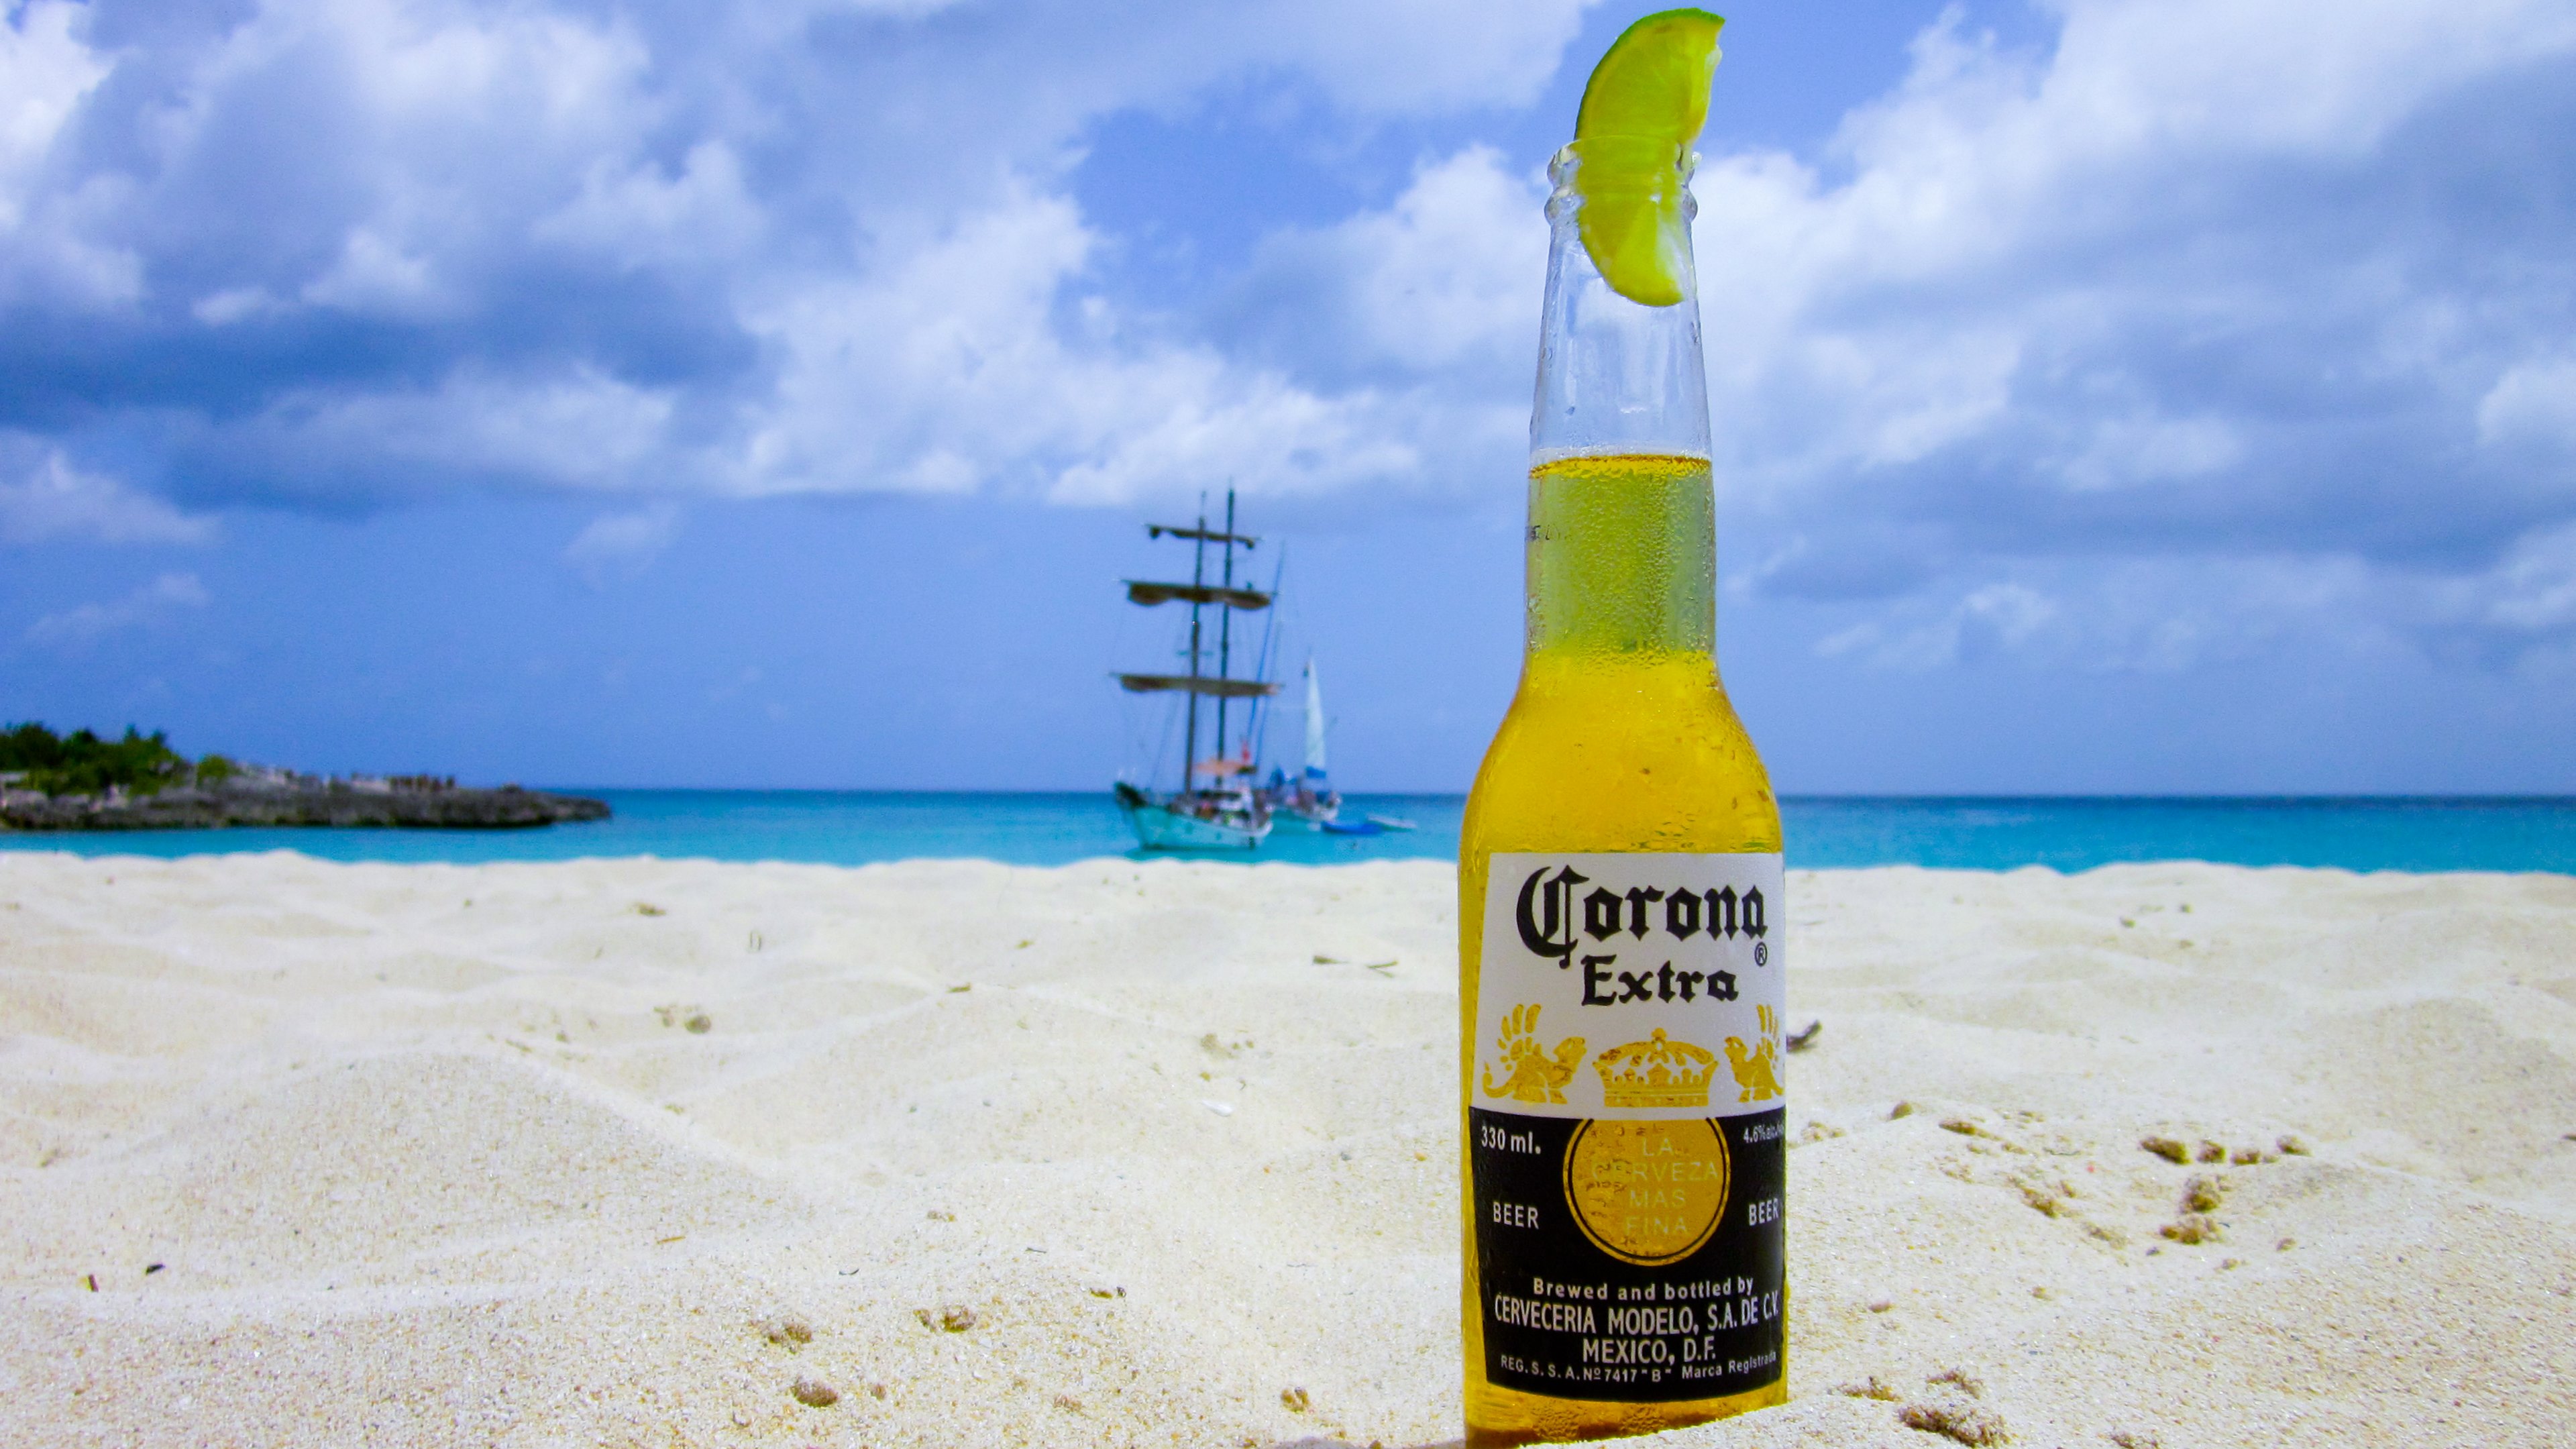  download Corona Wallpaper HD Full HD Pictures [3840x2160] for 3840x2160